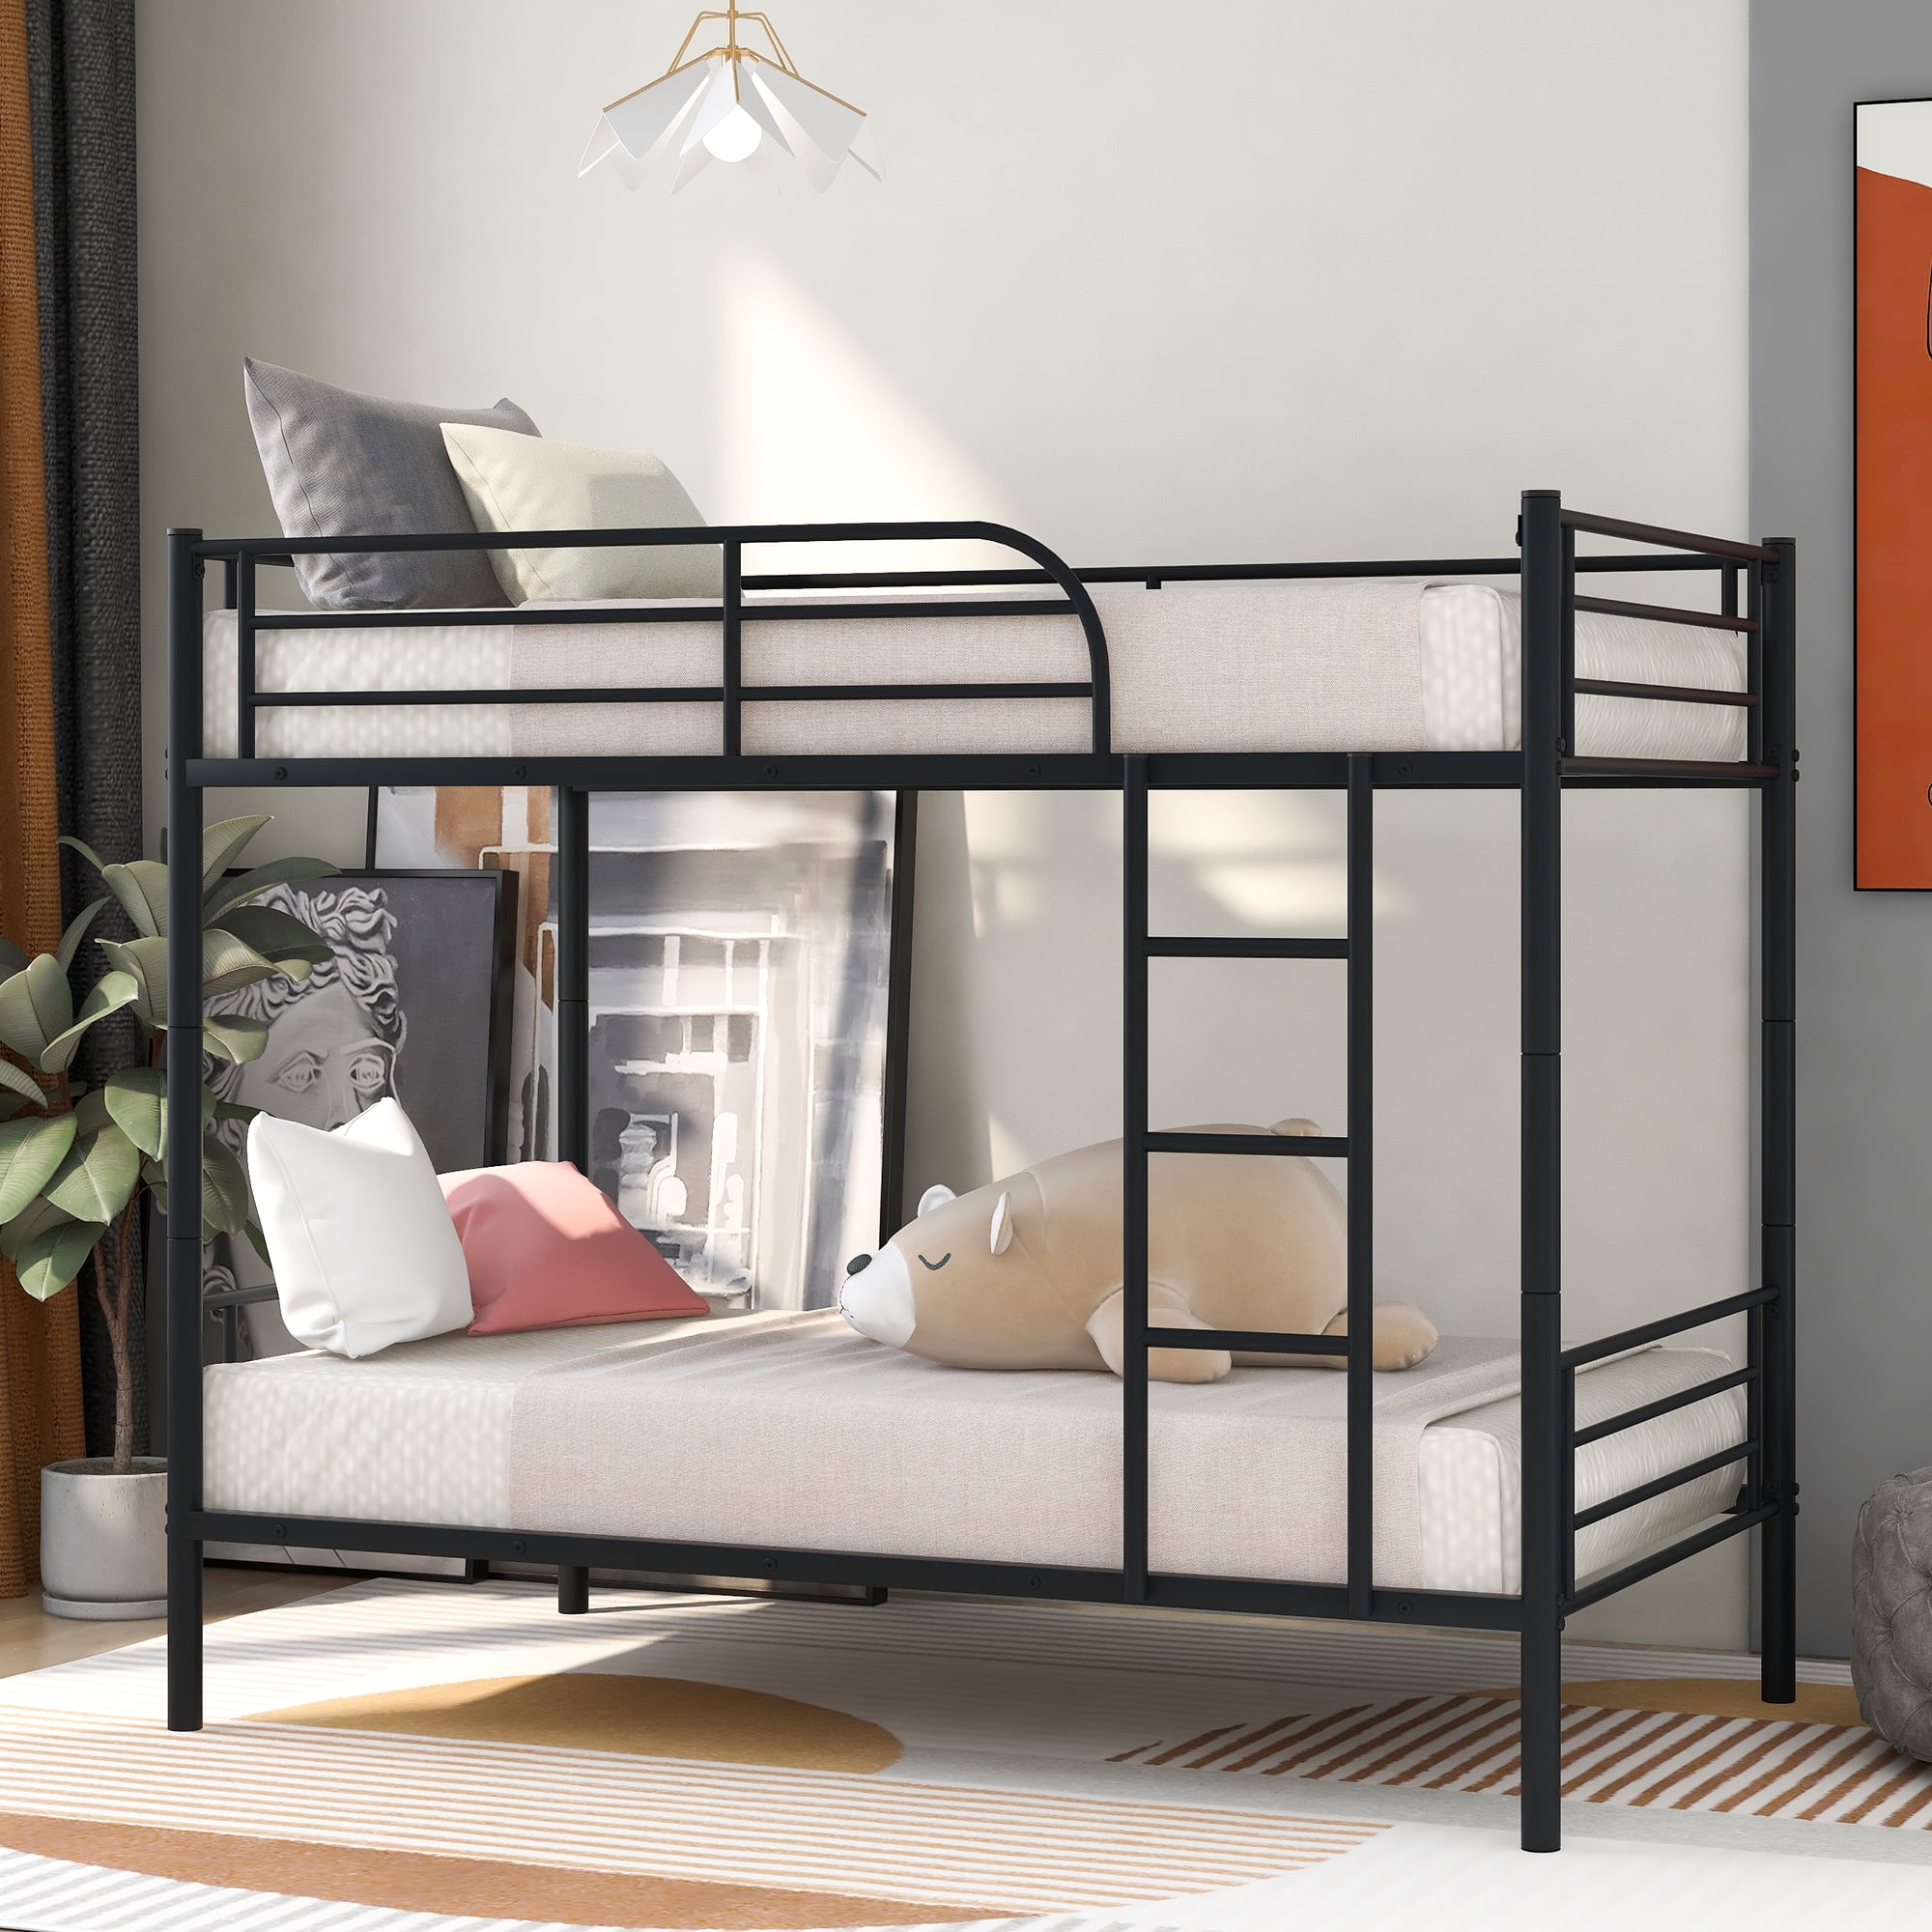 Details about   Dorm for Kids Adult Children Metal Bunk Beds Frame Twin over Twin Ladder NEW 